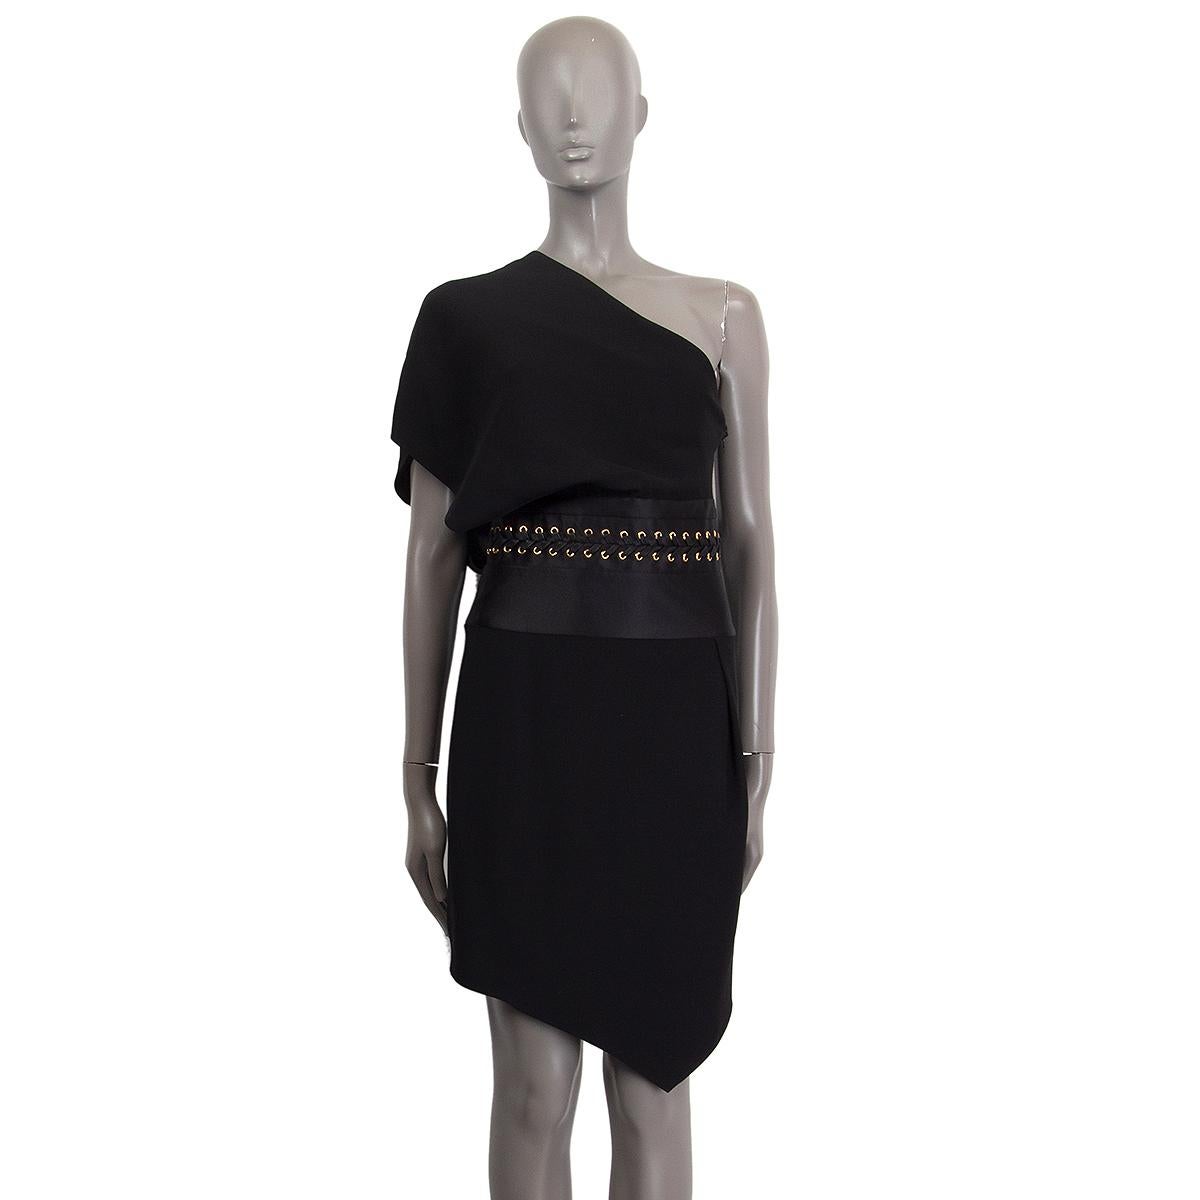 100% authentic Alexandre Vauthier sleeveless asymmetrical dress in black acetate ( 50%) and viscose (50%) with a one shoulder strap and a braided gold tone ring detail. Closes on the side with a concealed zipper. Lined in black silk (94%) and